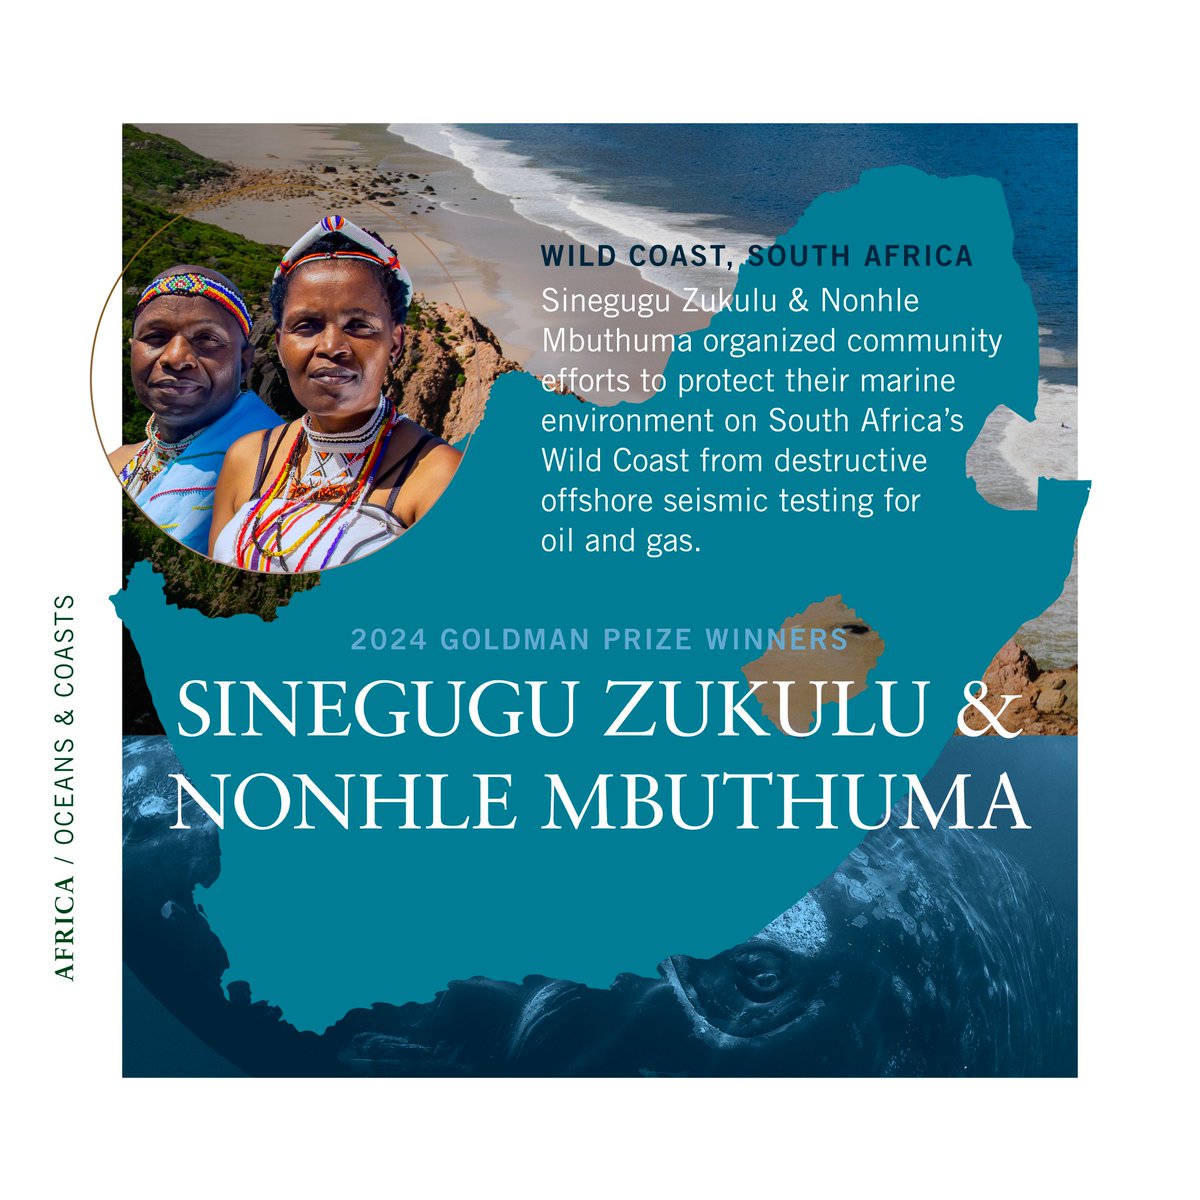 Nonhle Mbuthuma & @SineguguZukulu organized community efforts to protect the marine environment on South Africa’s Wild Coast from destructive offshore seismic testing for oil and gas. #GoldmanPrize 🌎🏆 👉 Learn more: bit.ly/44hwc7T